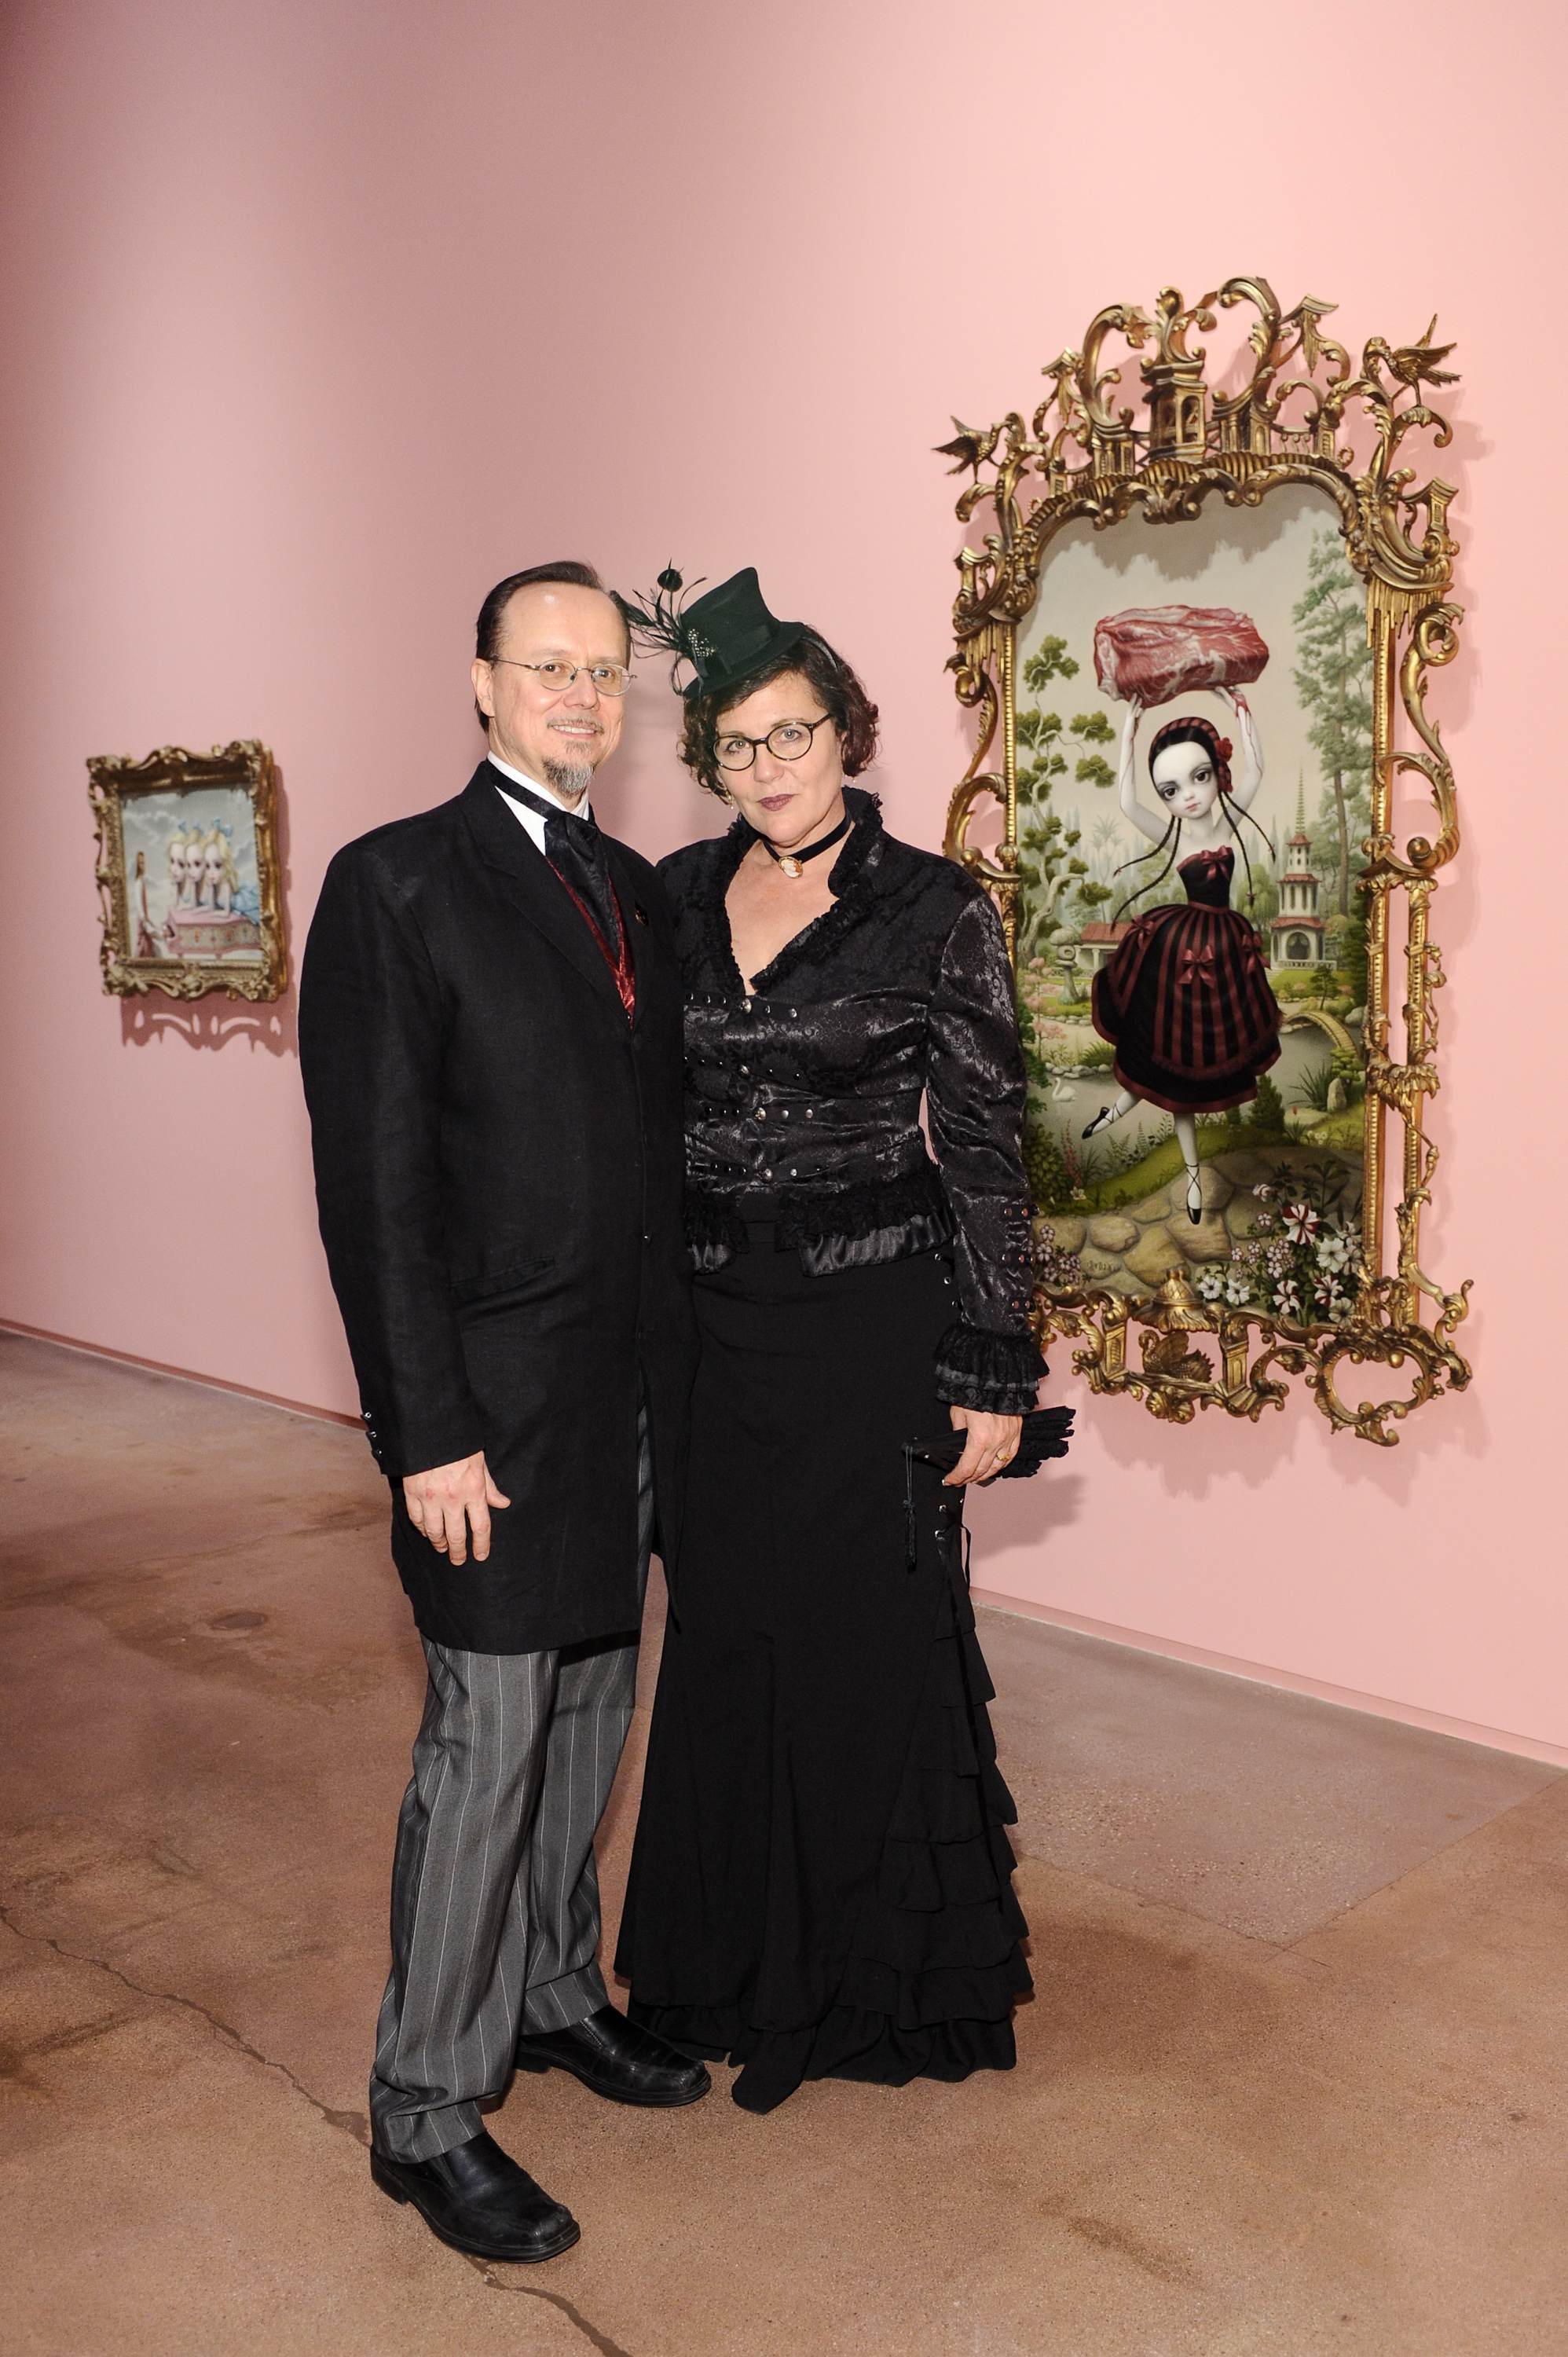 Guess Who Showed Up at Mark Ryden's Latest Art Show? | HuffPost1996 x 3000